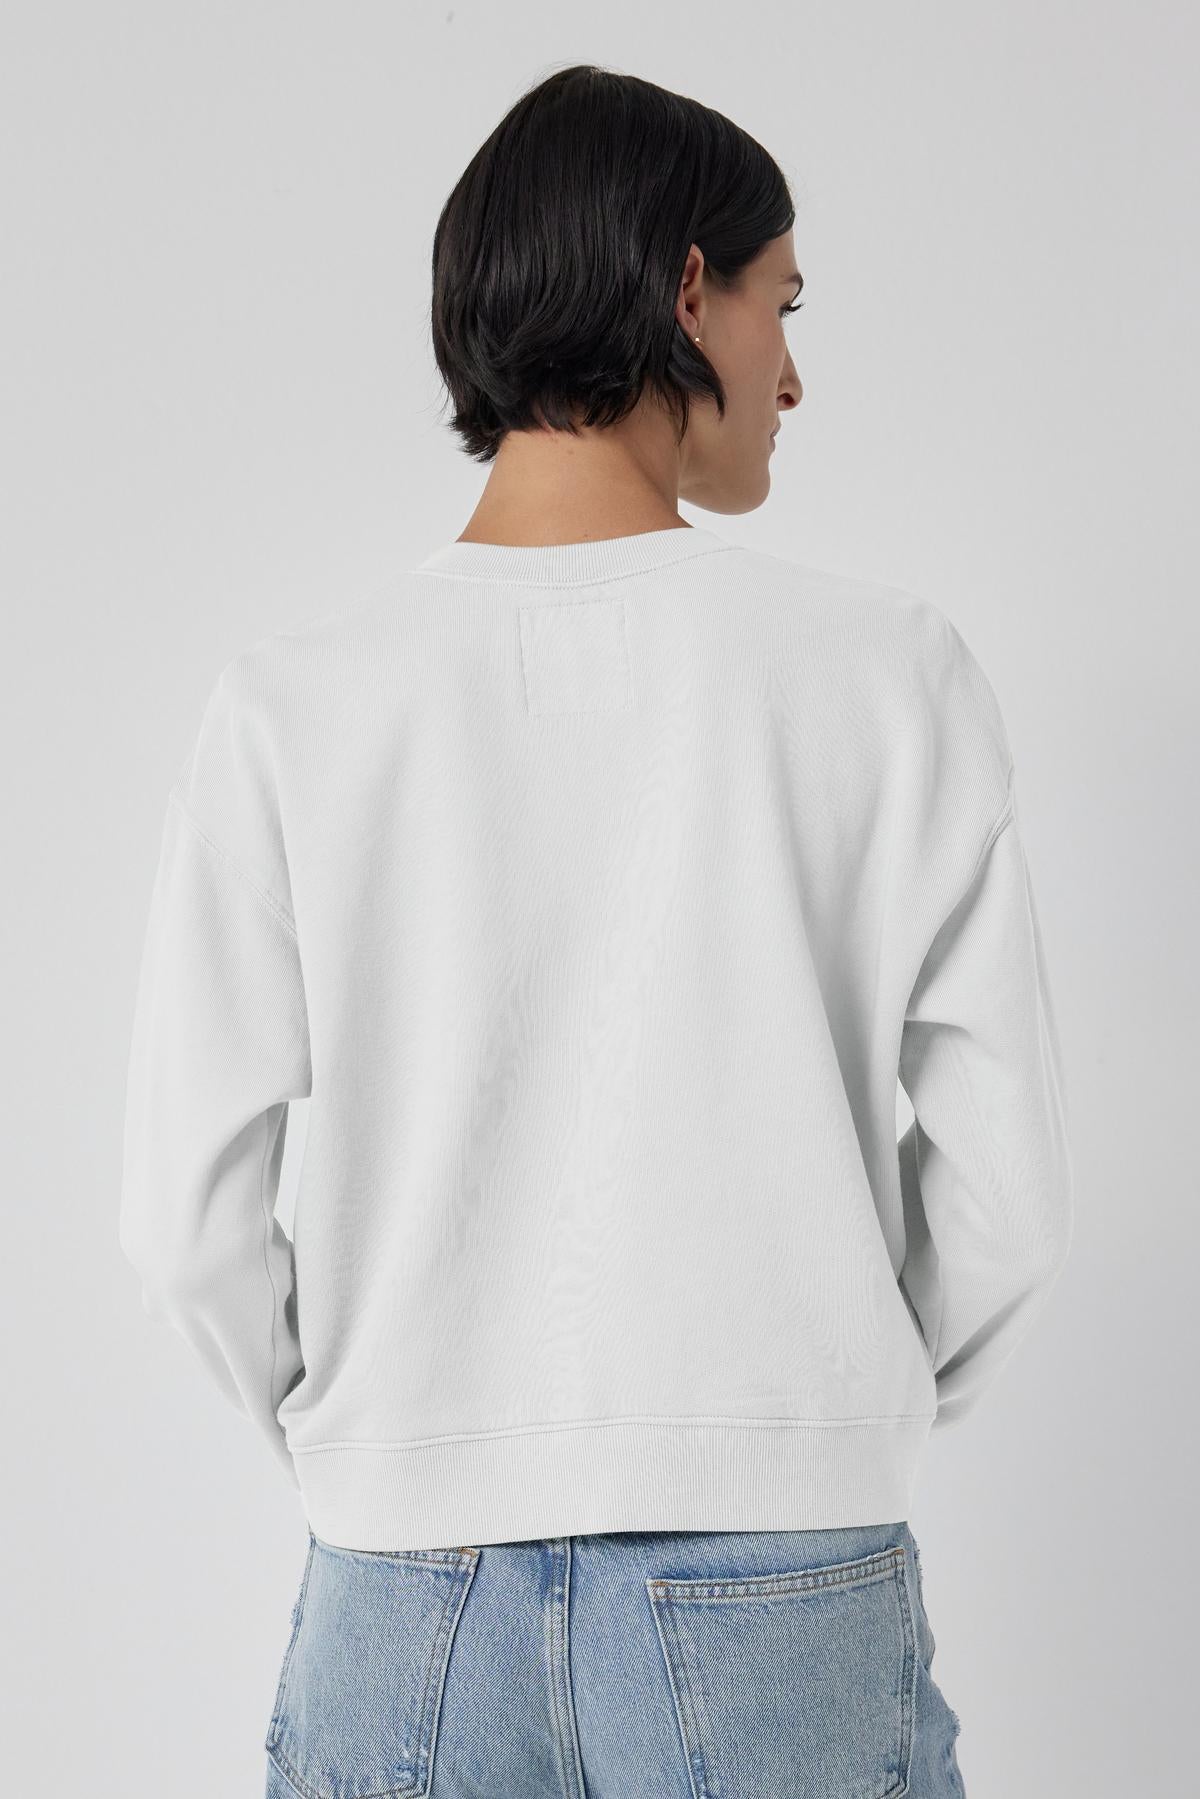   The back view of a woman wearing a white Velvet by Jenny Graham YNEZ SWEATSHIRT and jeans. 